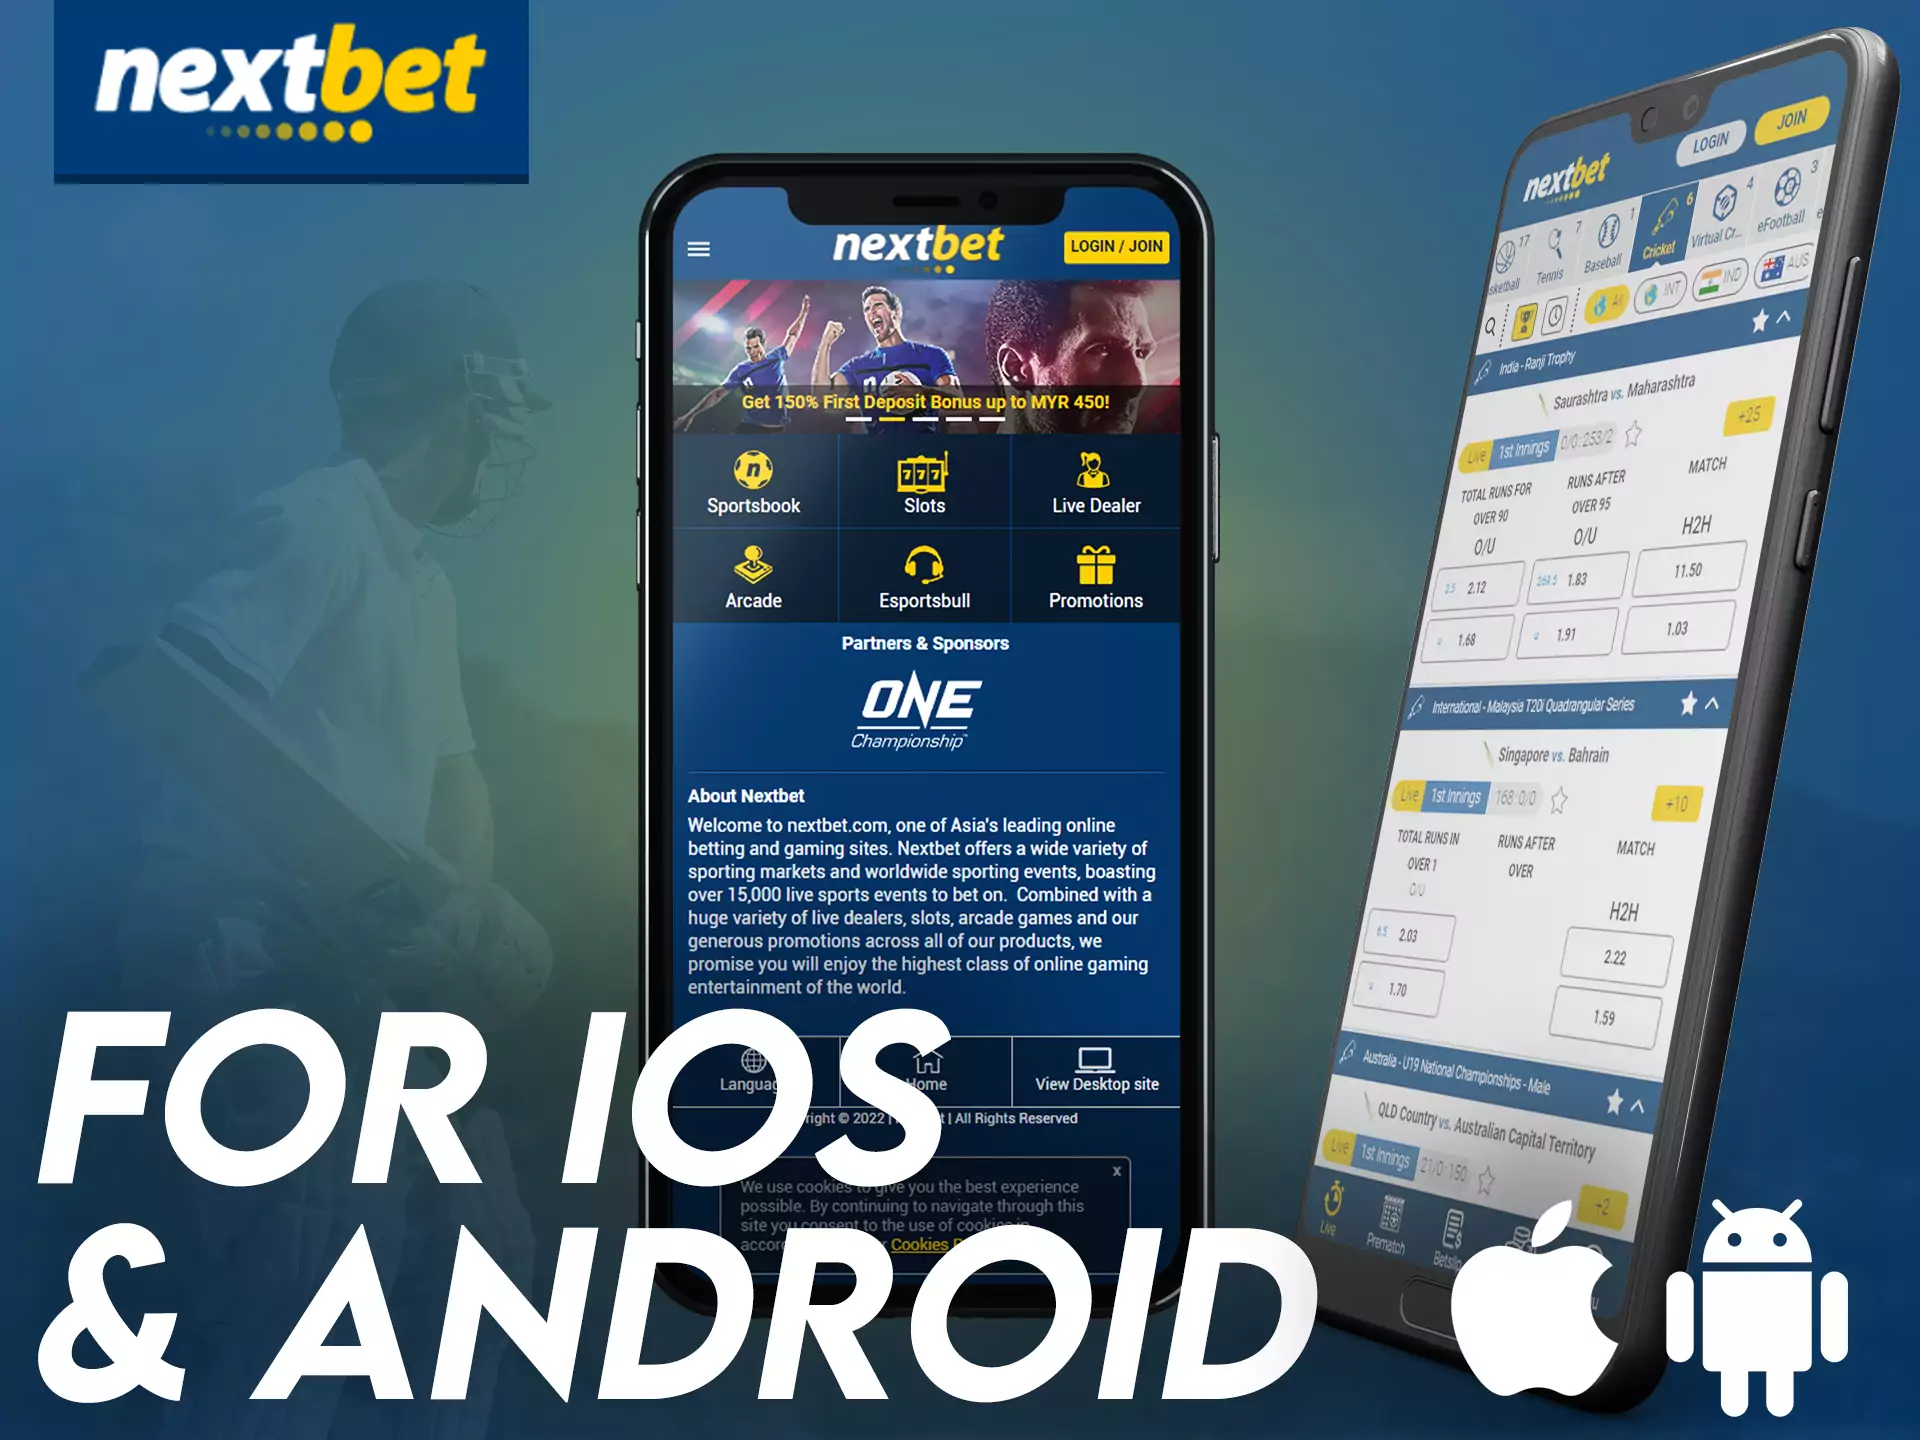 Nextbet can be installed on a personal device with an Android or iOS system.